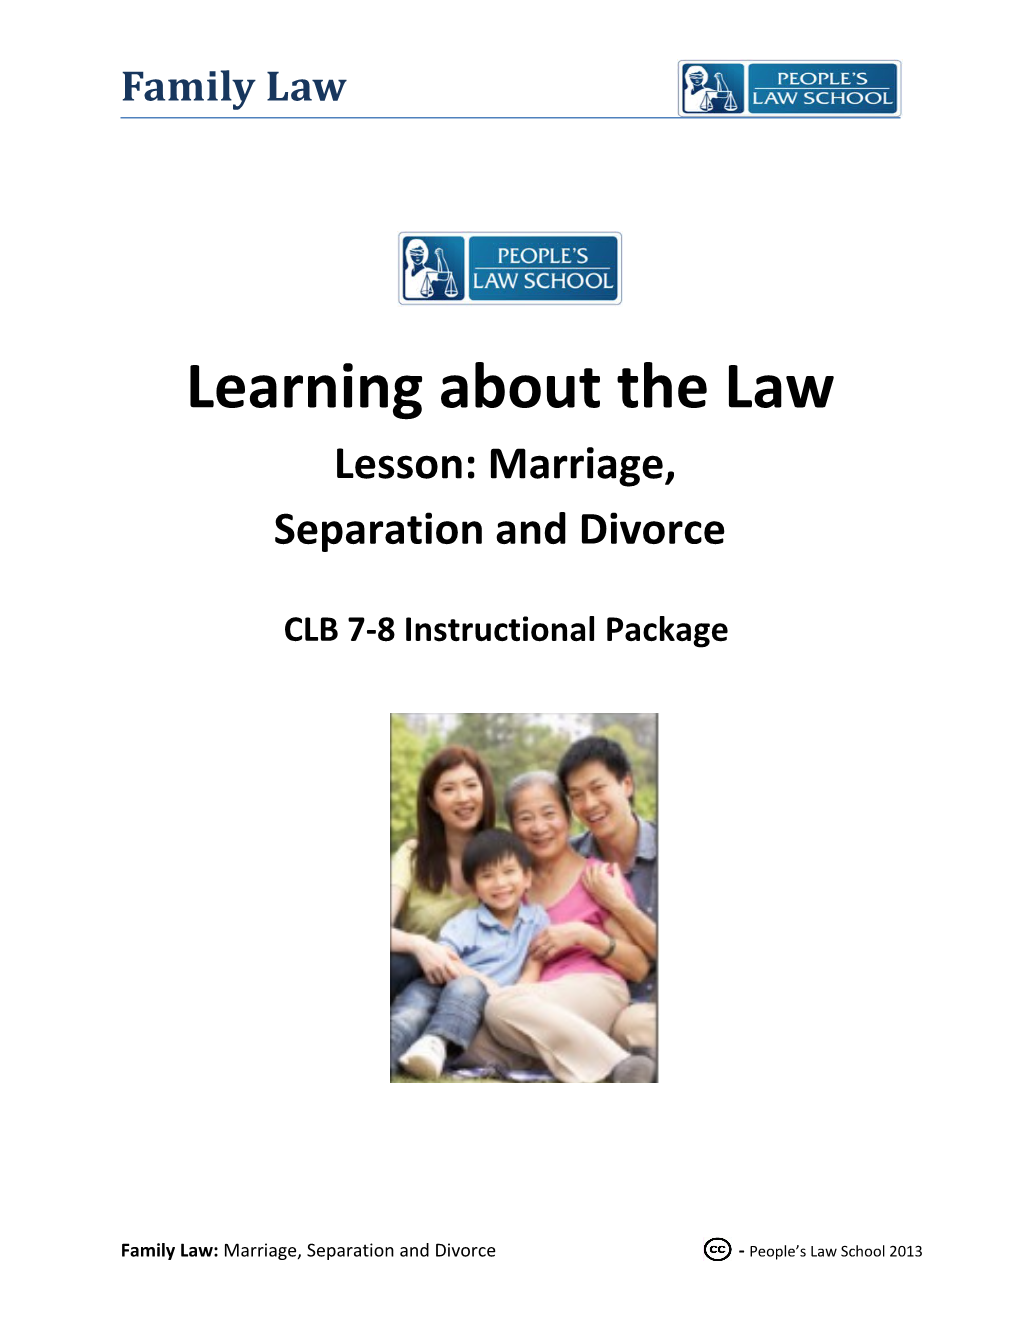 Lesson Plan: Marriage, Separation and Divorce (CLB 7-8)